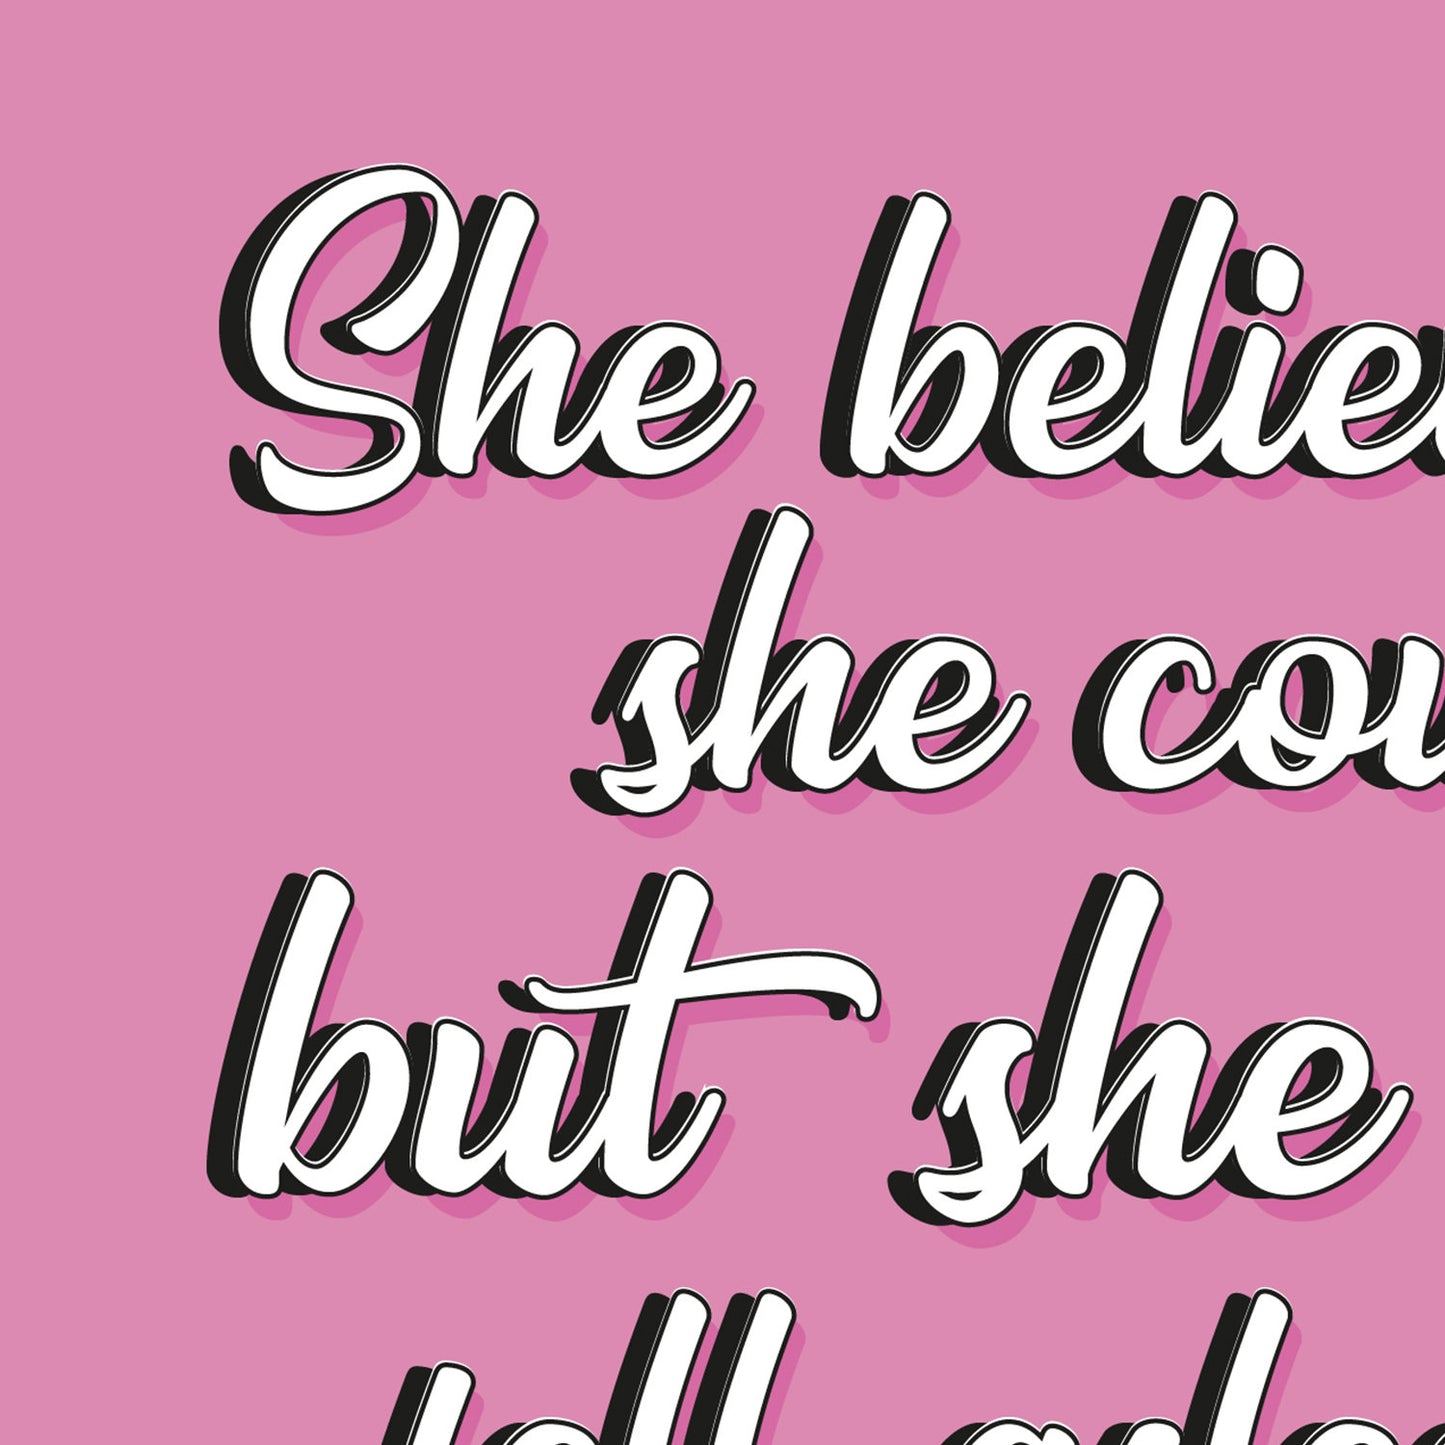 She believed she could but she fell asleep Funny Quote Typography Print